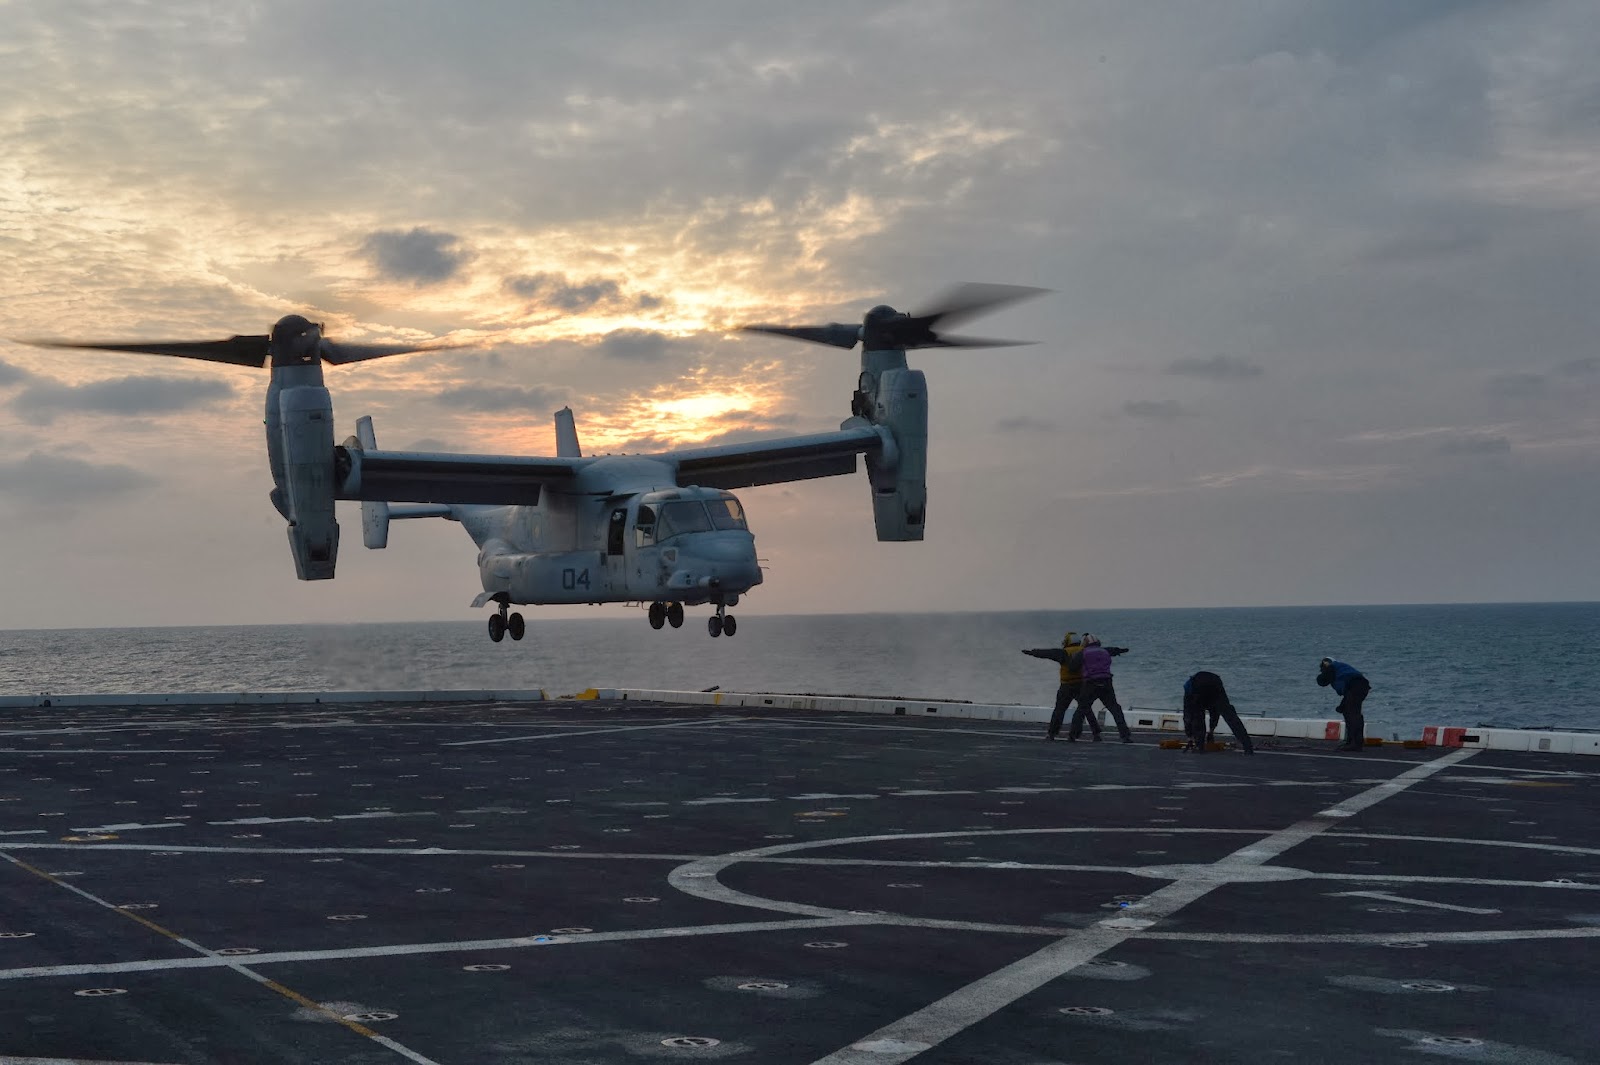 mv 22 osprey, military, bell boeing v 22 osprey, bell boeing, helicopter, marines, navy, uss mesa verde, vehicle, military helicopters 32K